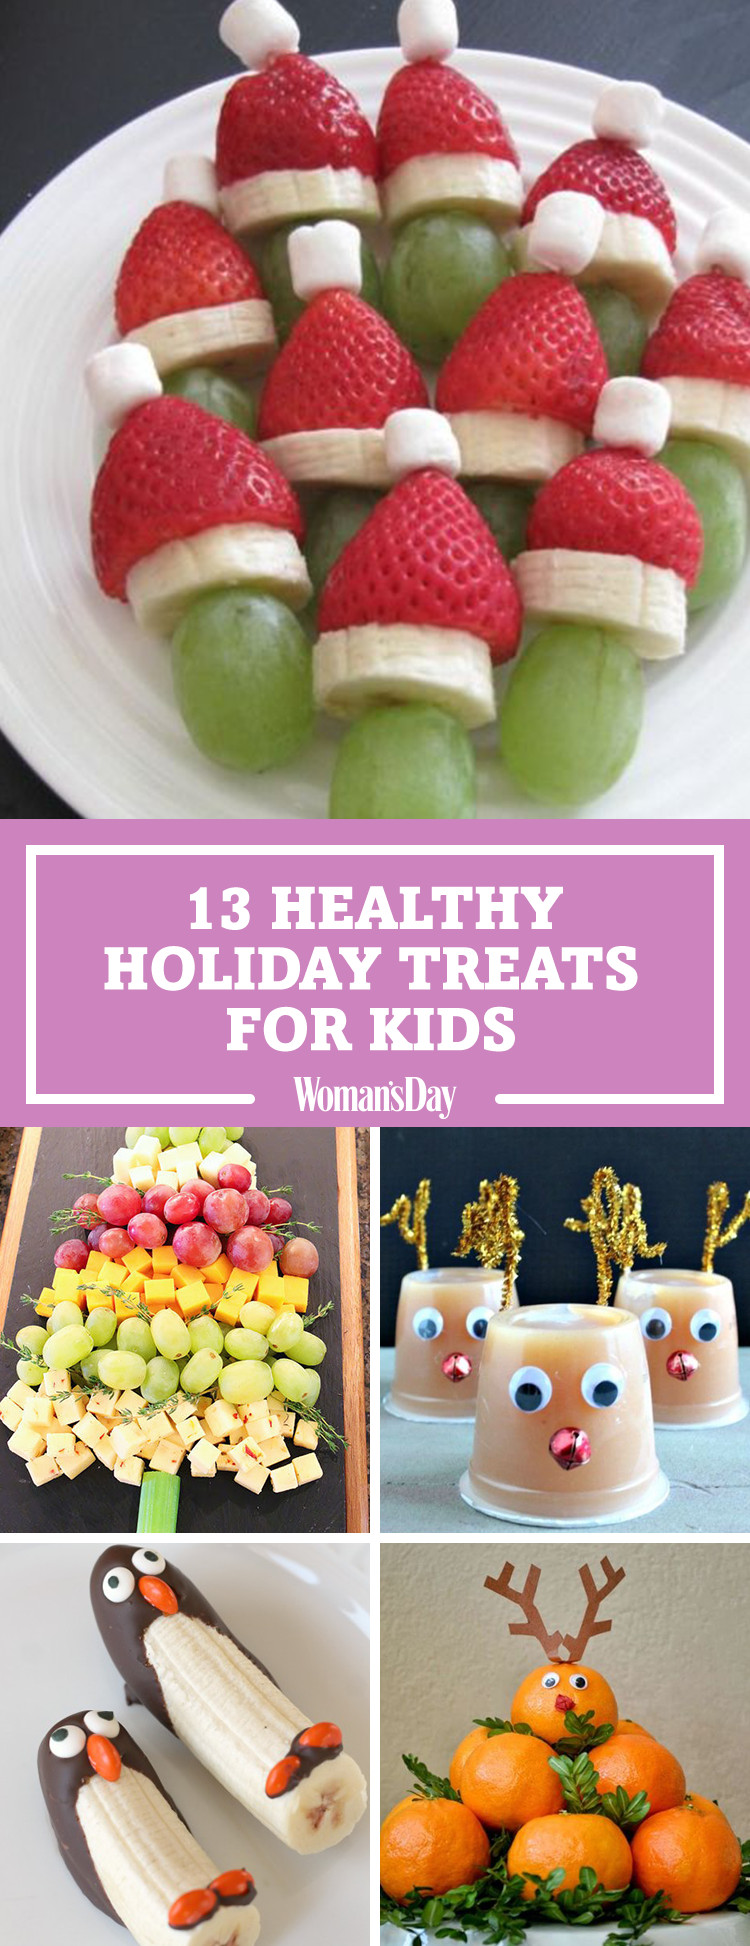 Healthy Snack Recipes For Kids
 17 Healthy Christmas Snacks for Kids Easy Ideas for